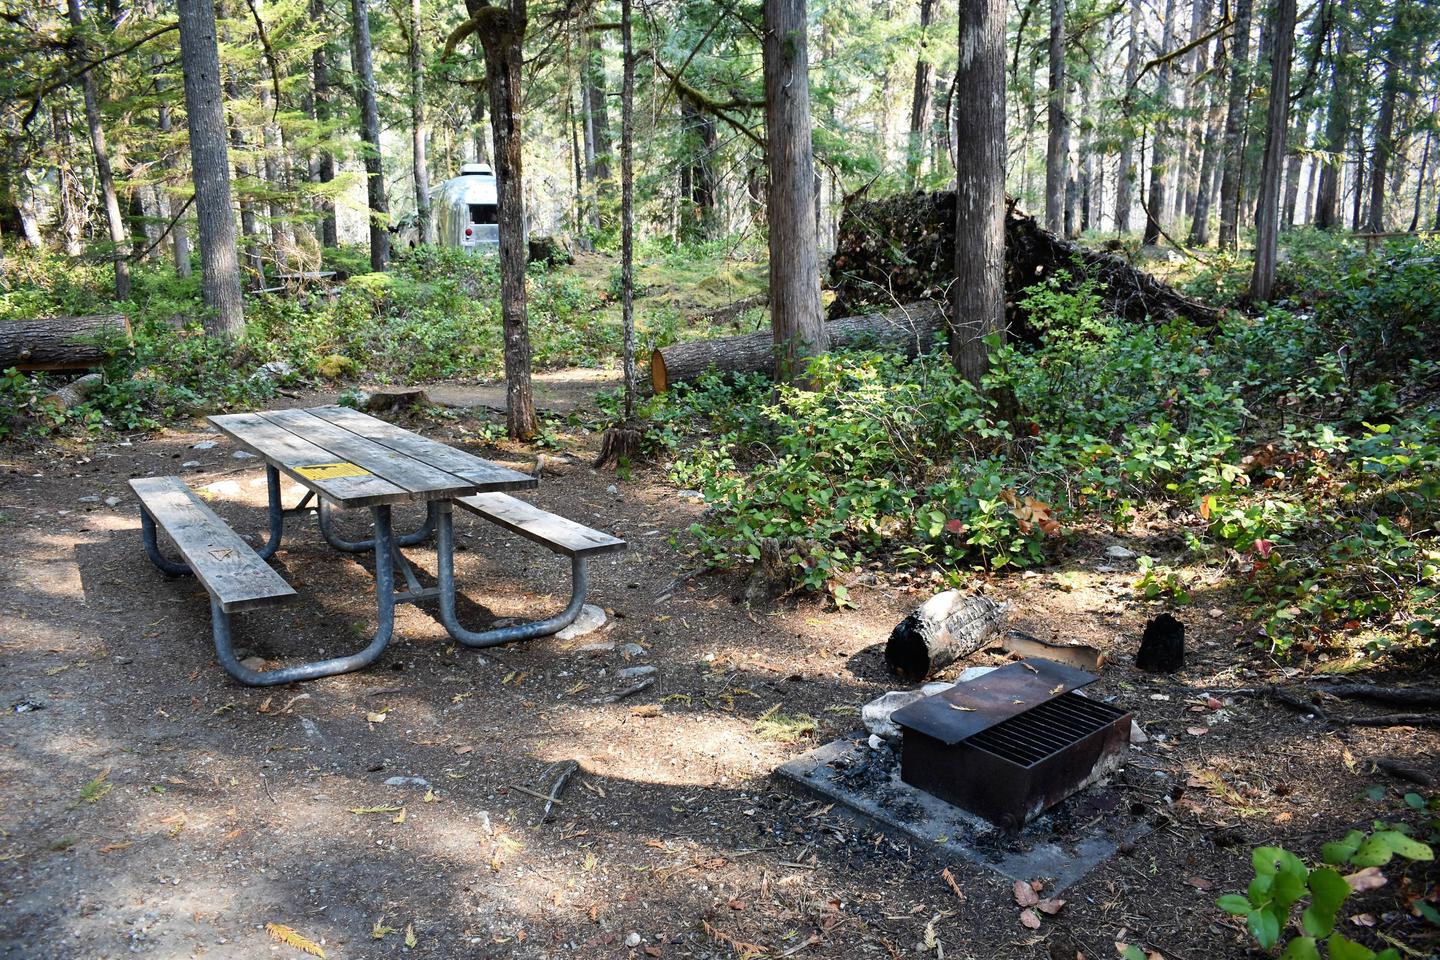 Picnic table, tent area, and fire ringView of campsite